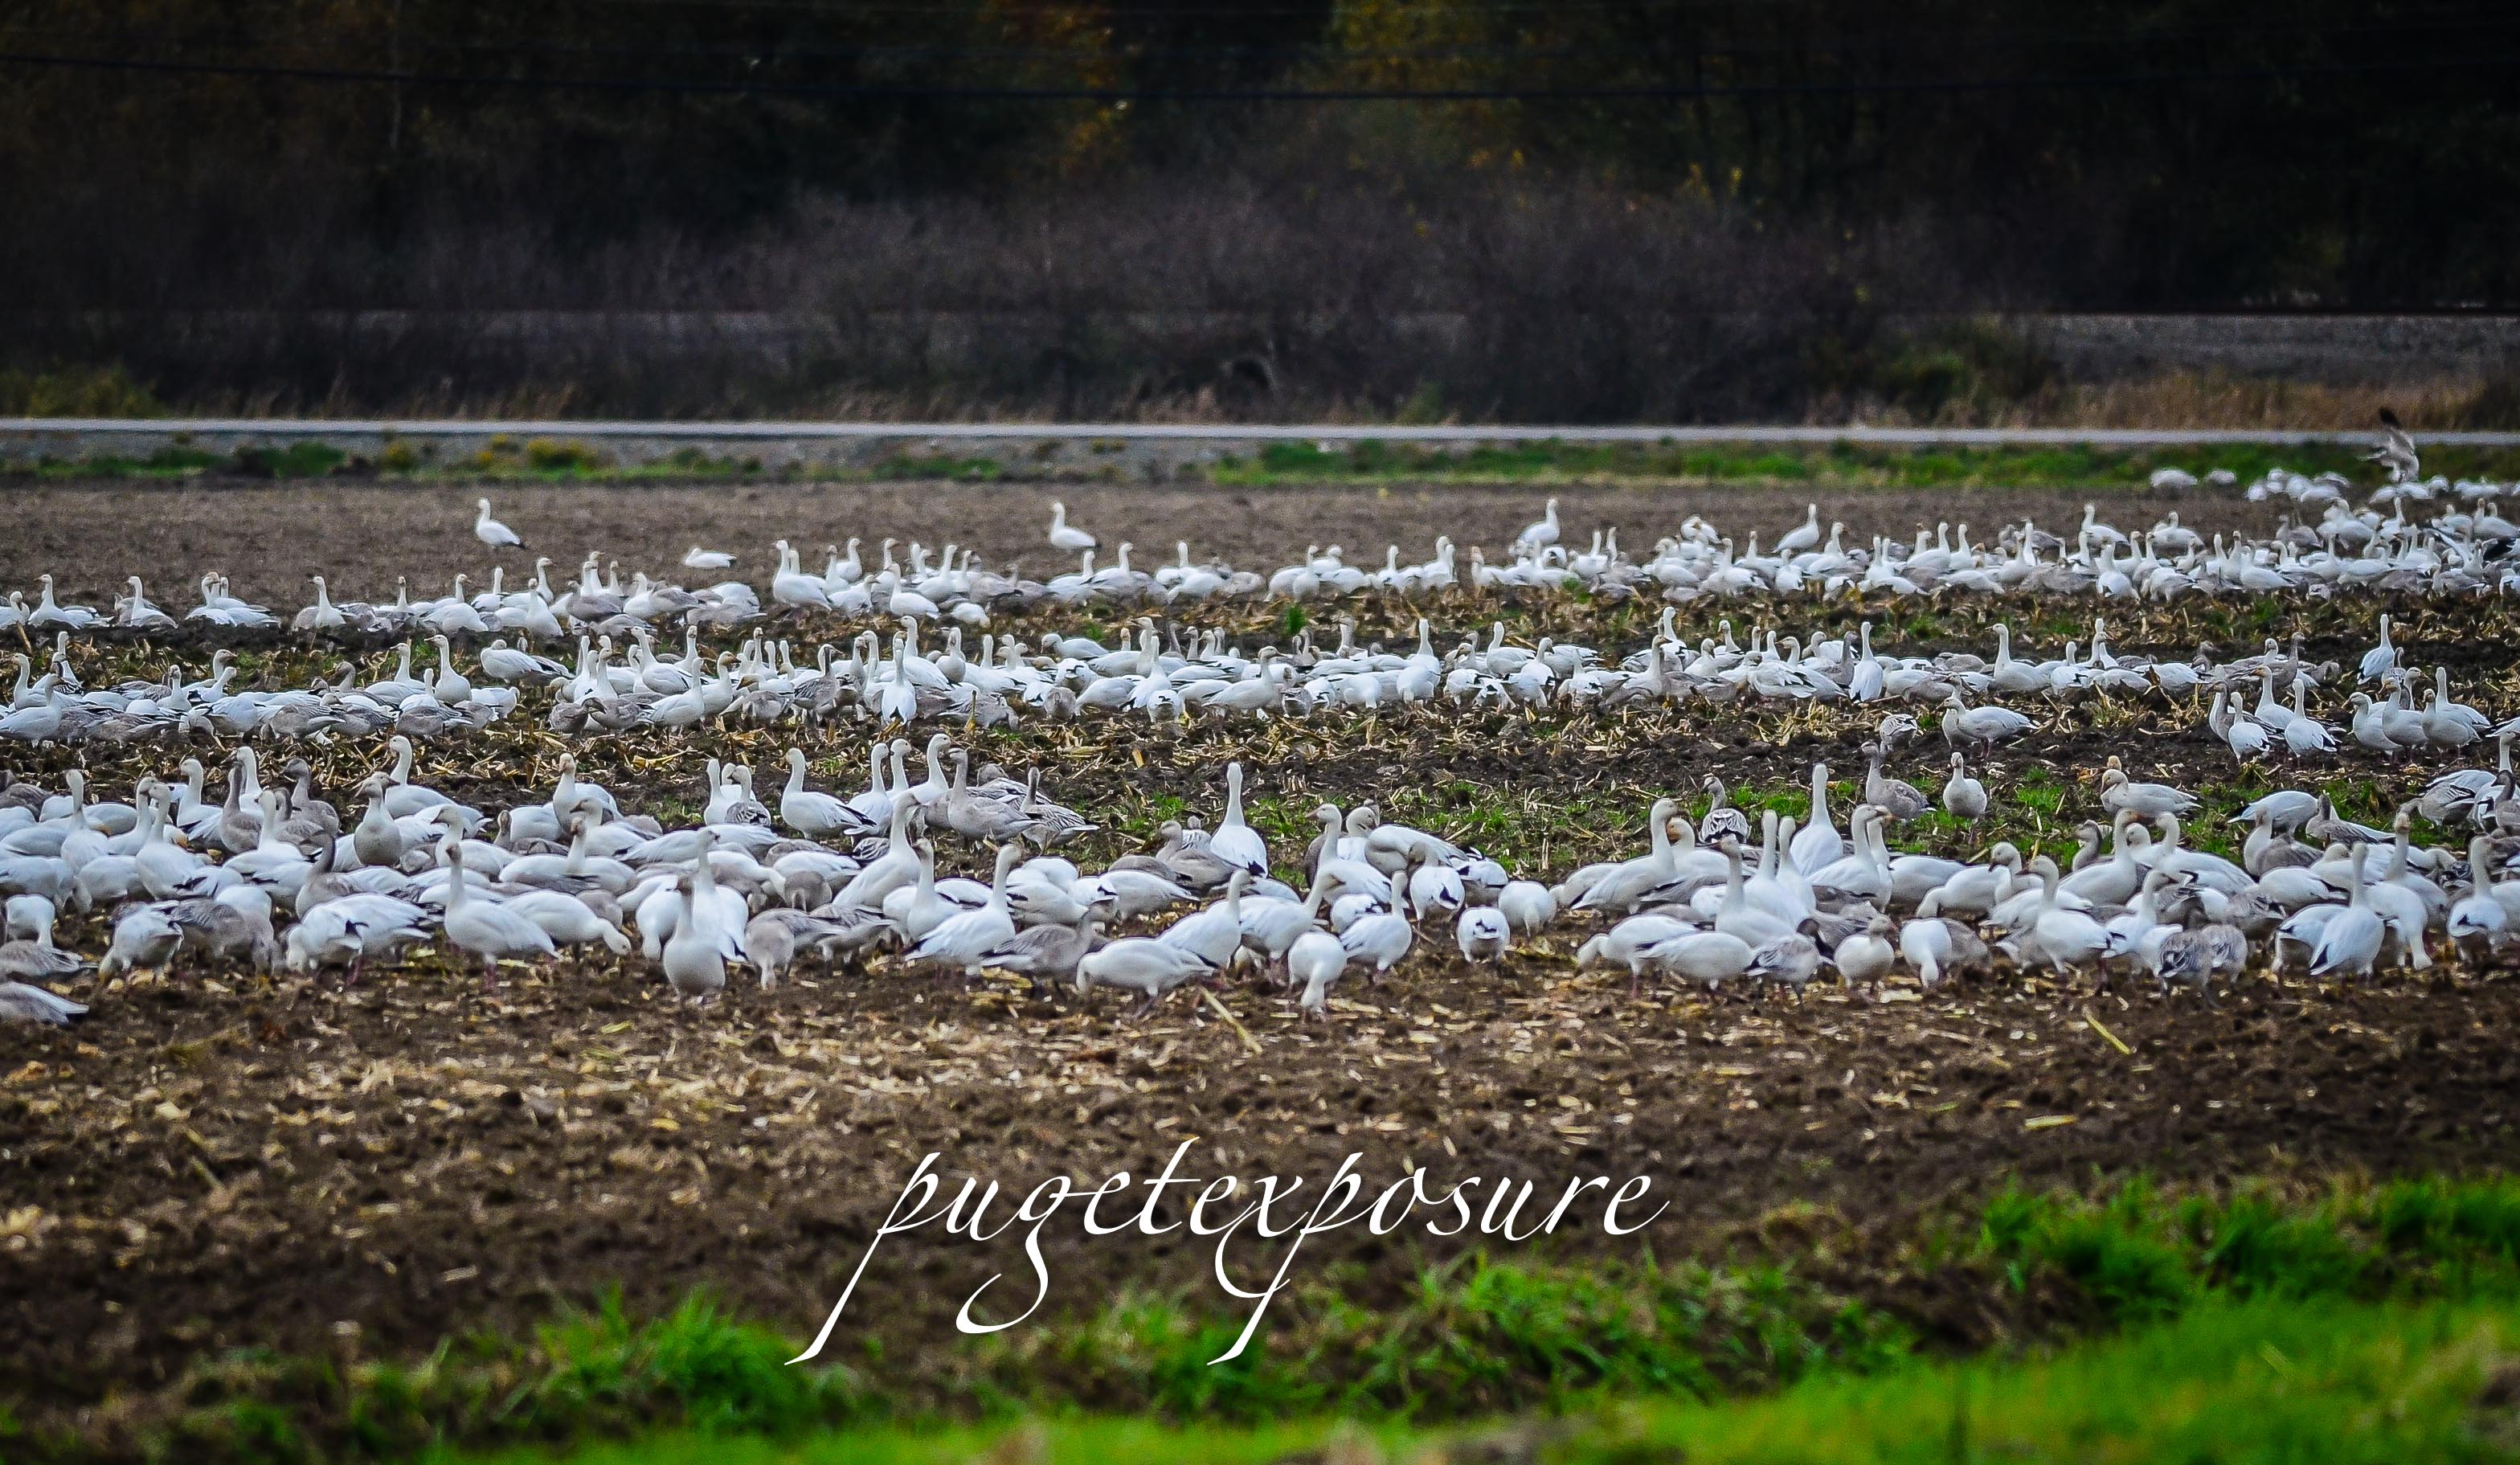 Snow Geese arrive in Mount Vernon, WA October 2013